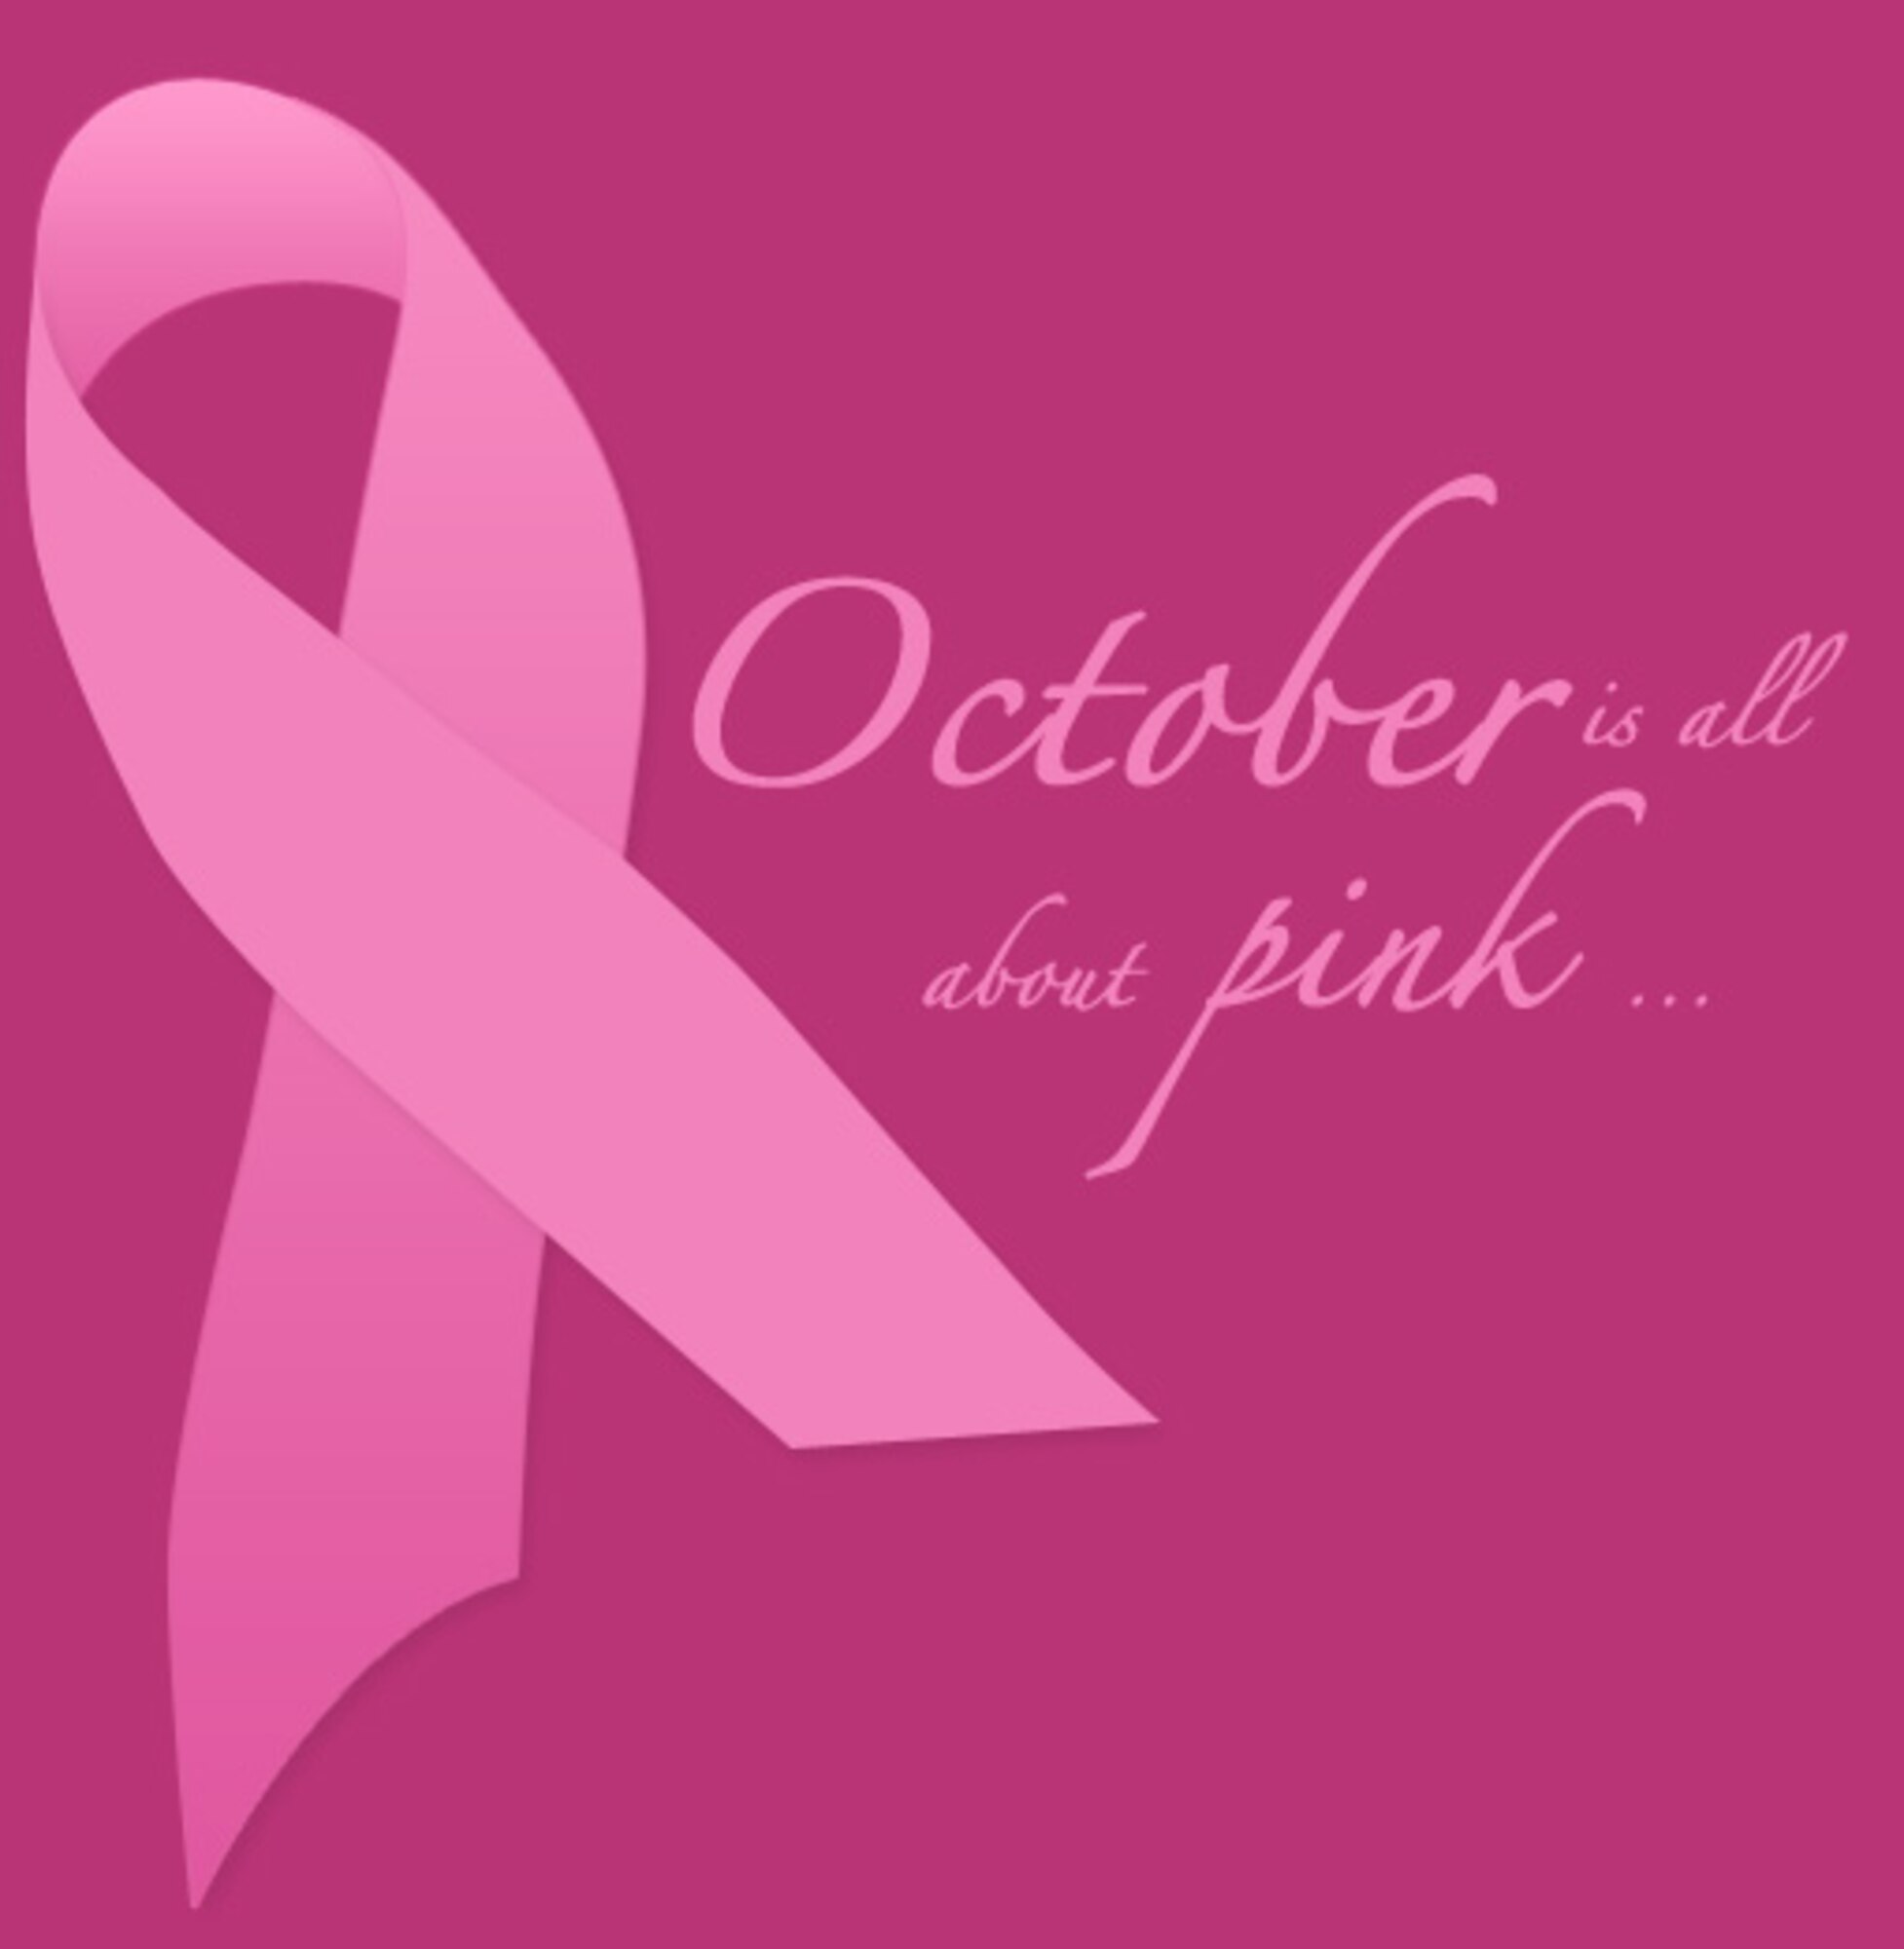 MINOT AIR FORCE BASE, N.D. -- The 5th Medical Group will host the 4th Annual Breast Cancer Awareness Event and Quilt Project at the Jimmy Dolittle Center here Oct. 23 at 6 p.m. The event is held in conjunction with National Breast Cancer Awareness Month, which is every October. (Courtesy graphic)